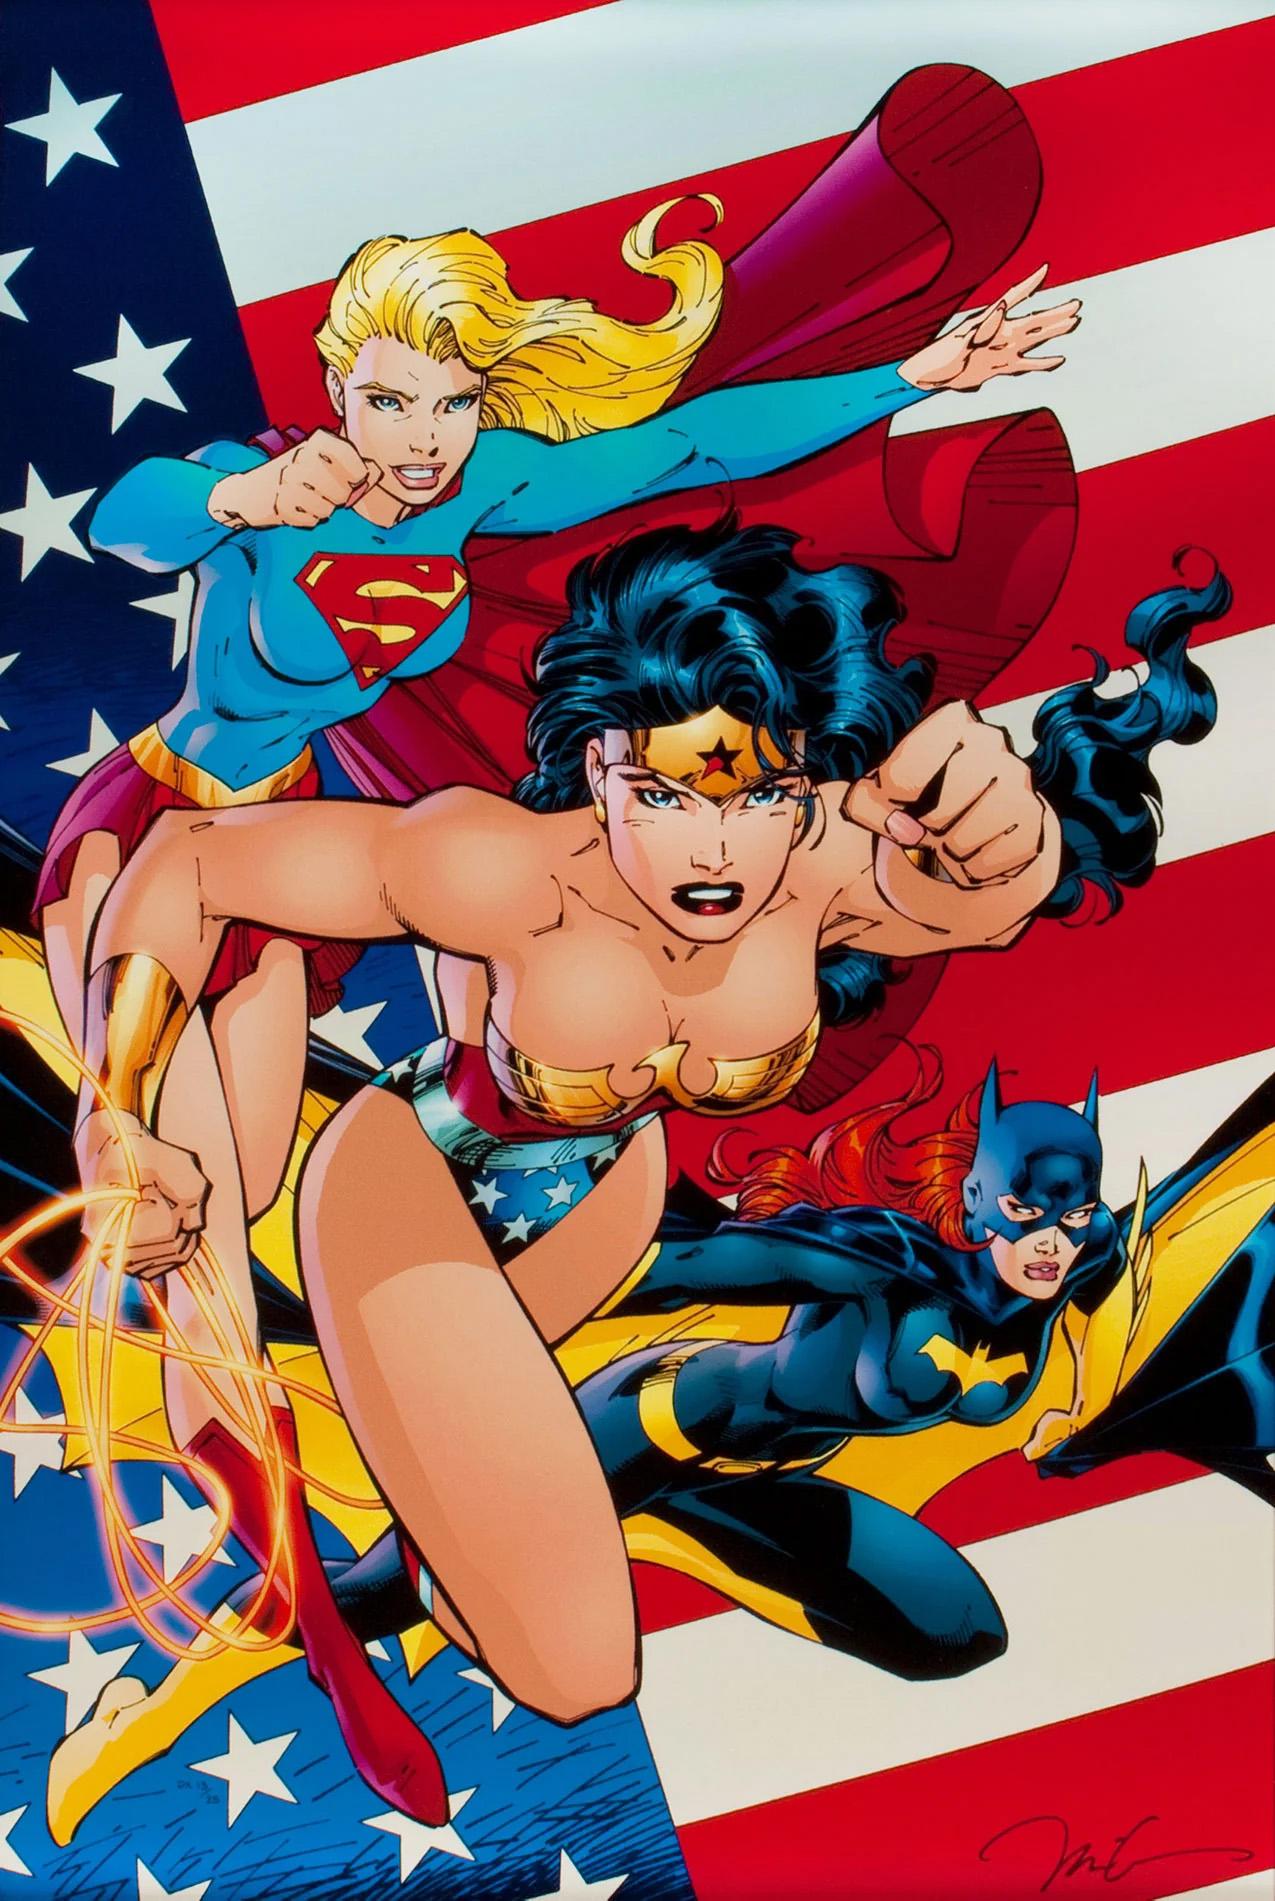 MEDIUM: Gicleé on Canvas 
EDITION: 25
SIZE: 19.625” x 29.875”
SIGNED BY:  Jim Lee
SKU: WA1160D

Heroines of the DC Universe features Supergirl, Wonder Woman and Batgirl, three of the most popular heroines ever to appear in comics, have combined